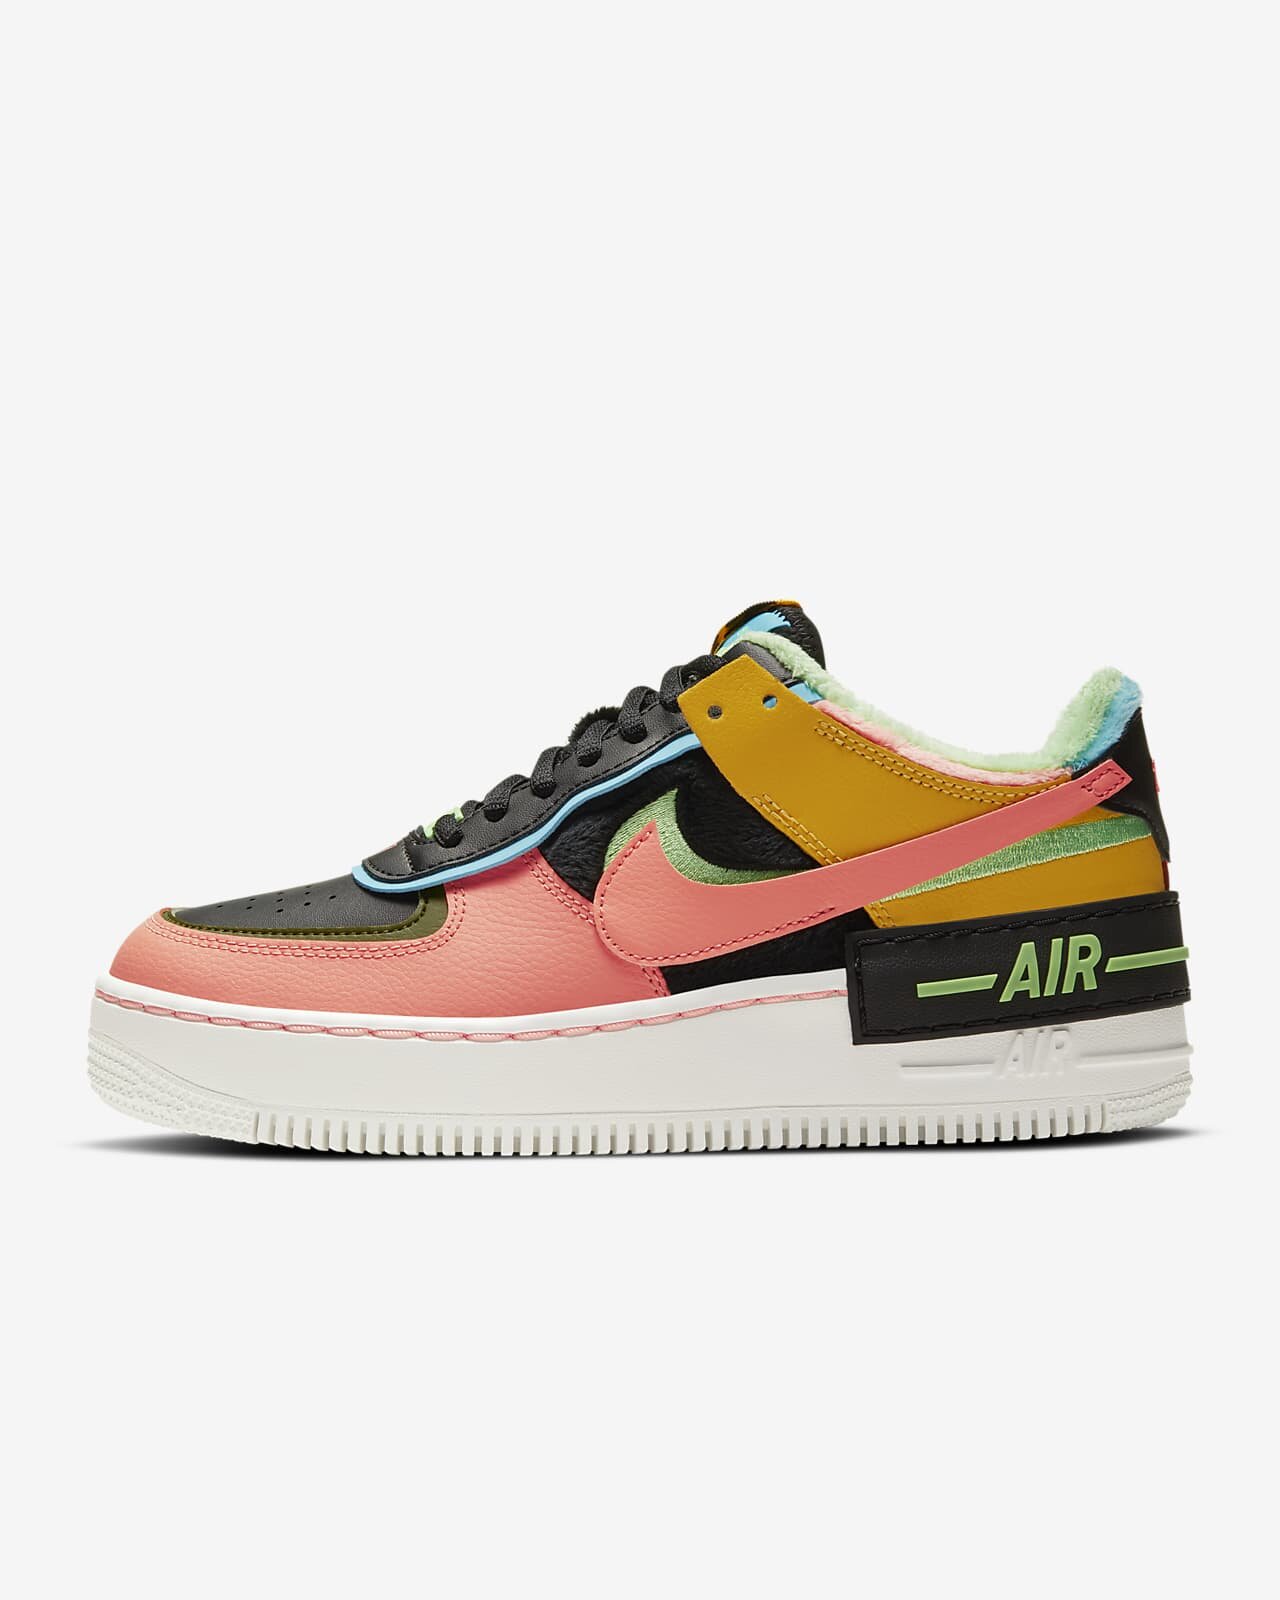 Hightop Classic Nike Af1 Basketball Shoes Sneakers Stock Photo